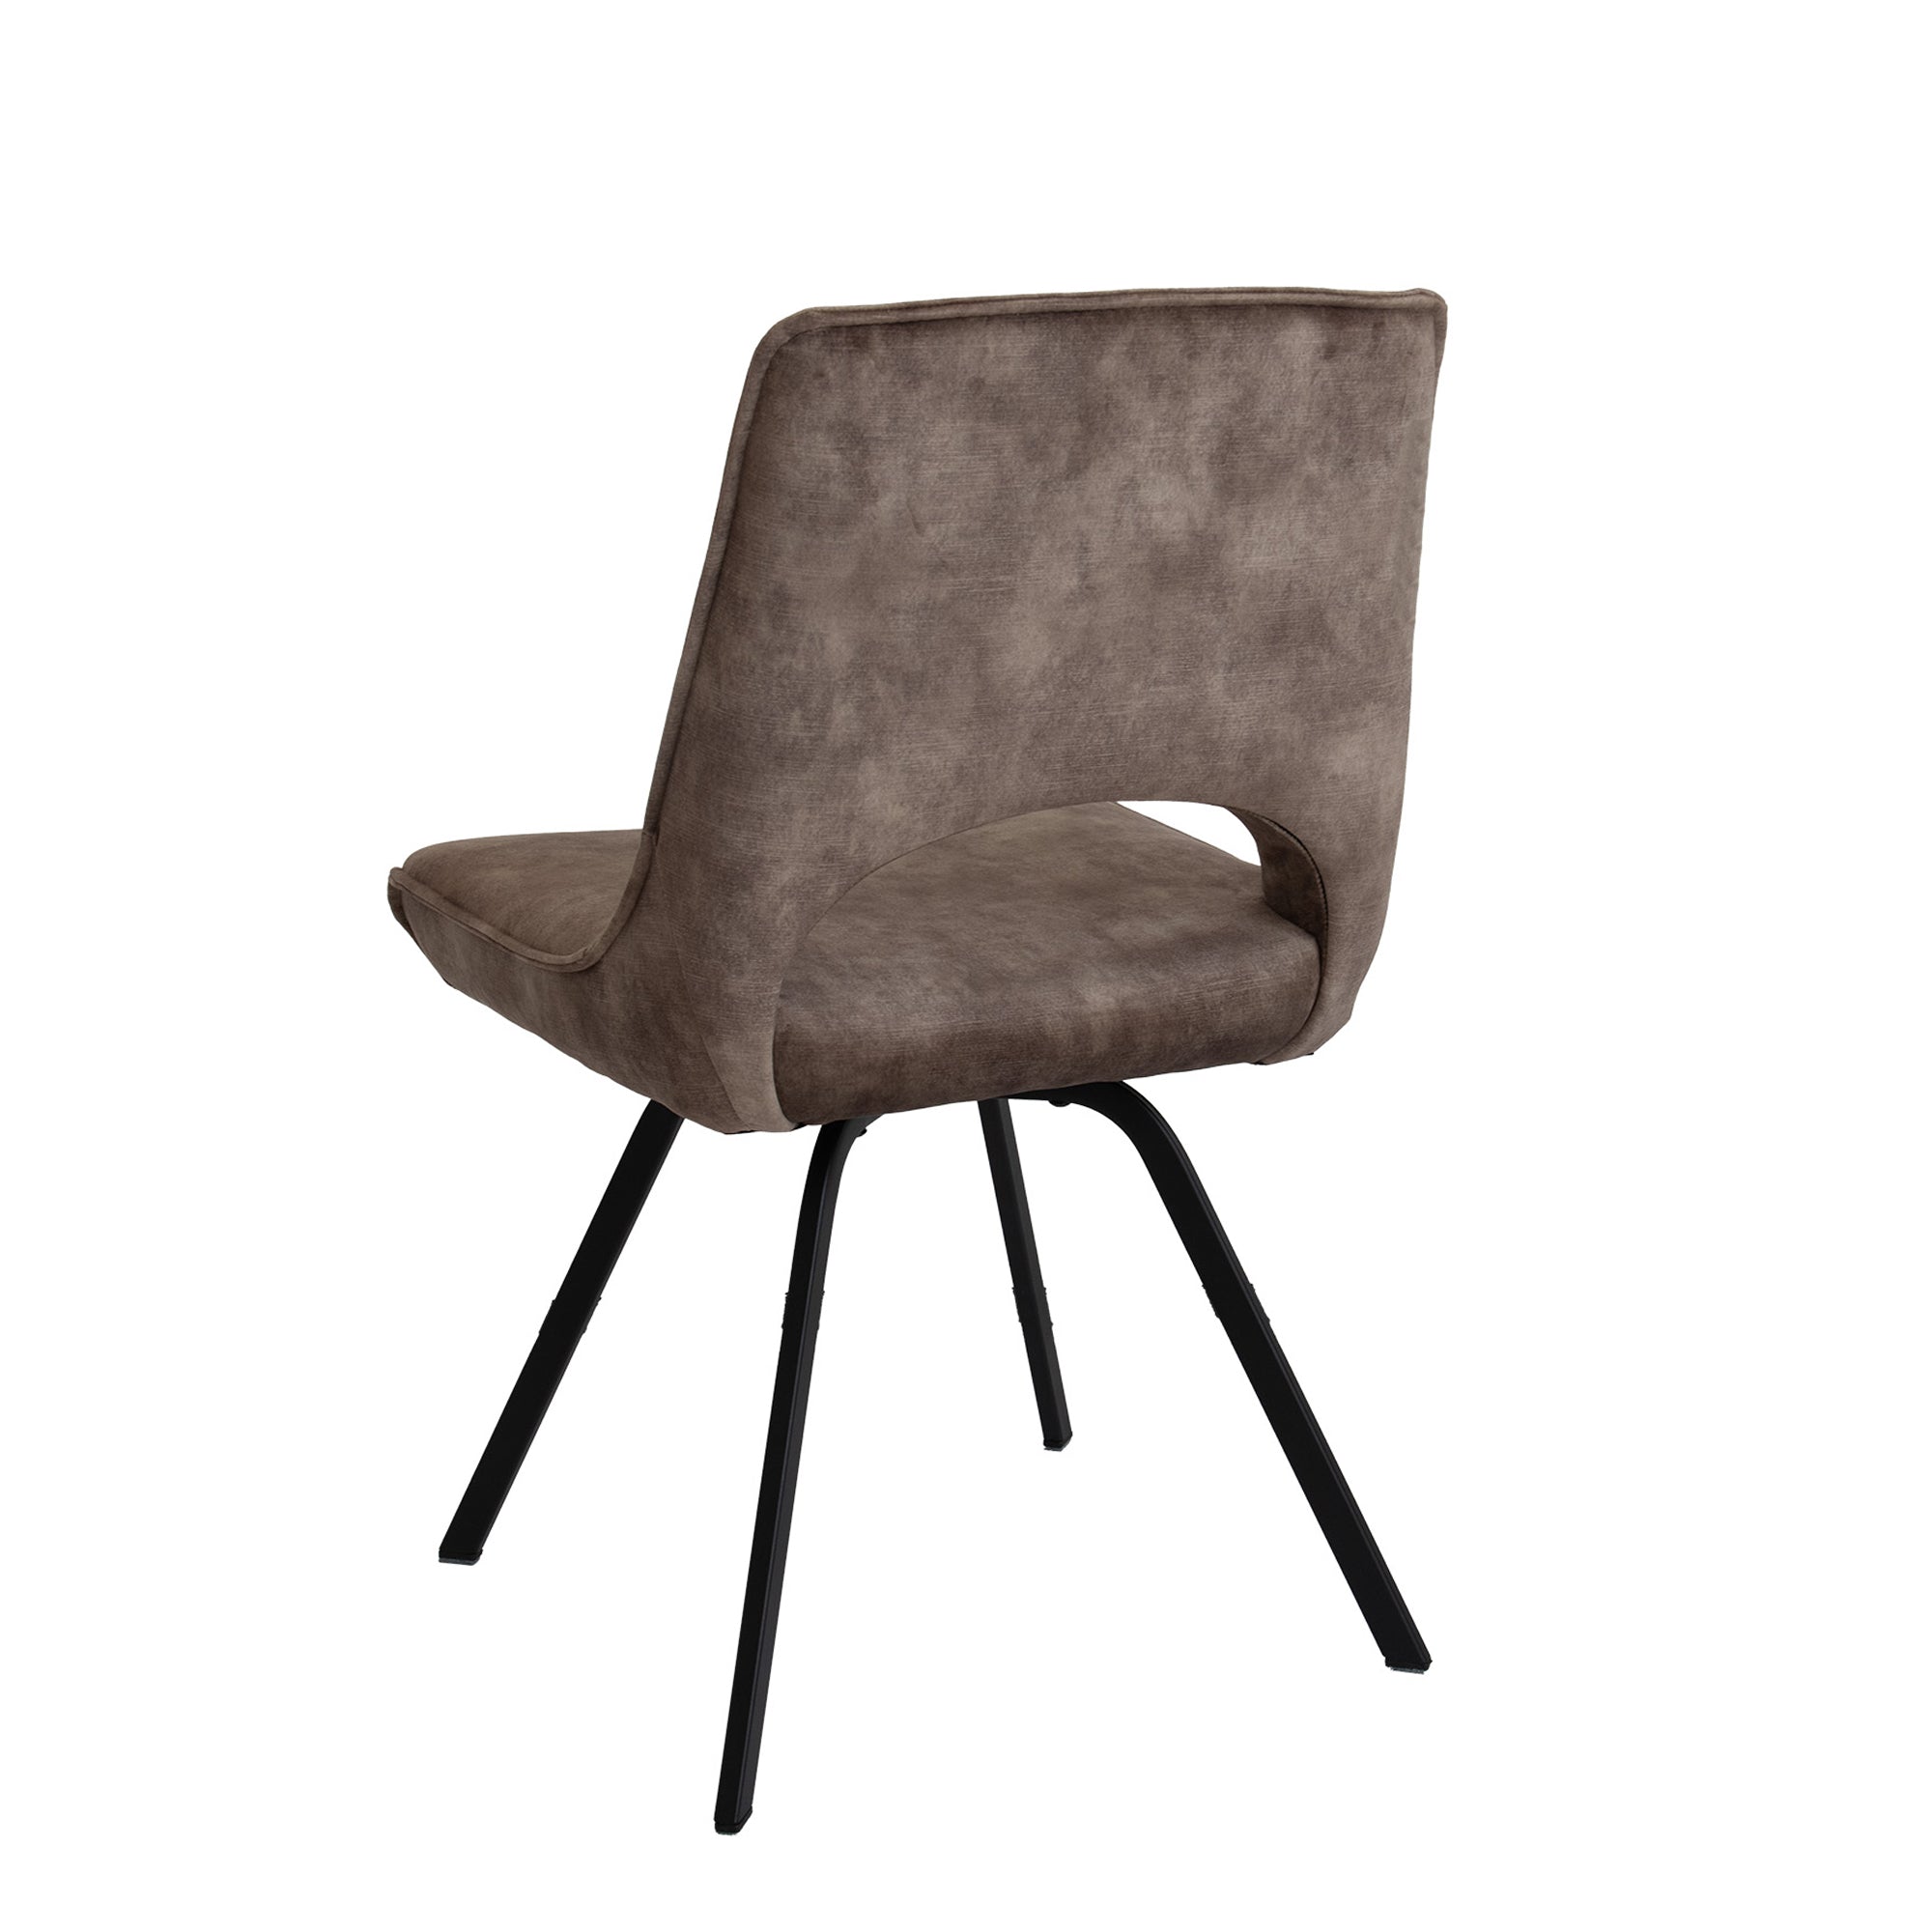 Chair With 'A' Black Metal Leg In Group 3 7293 Latte